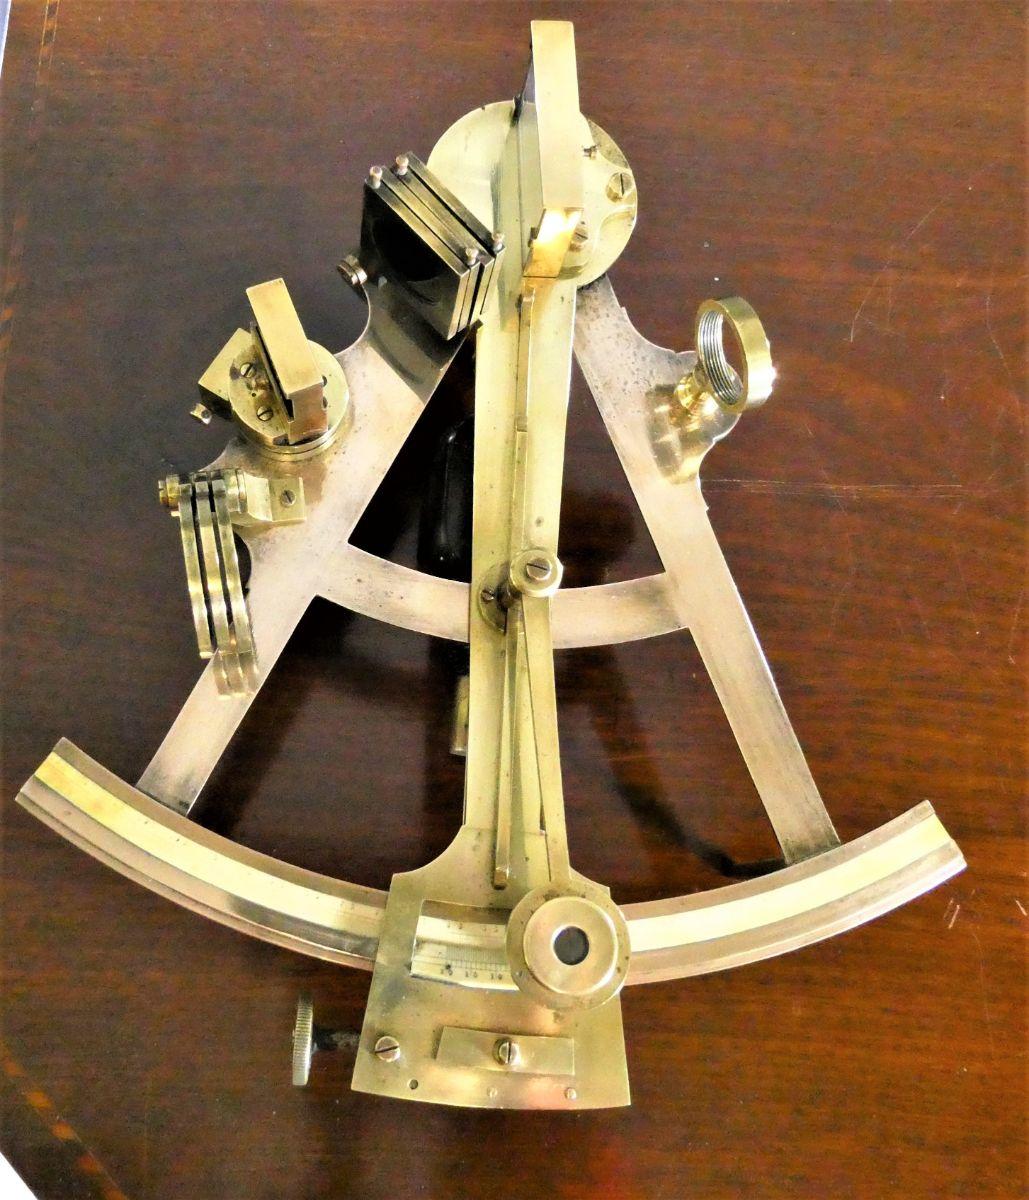 Early 19th Century A Fine 8 Inch Vernier Sextant by Whyte, Glasgow